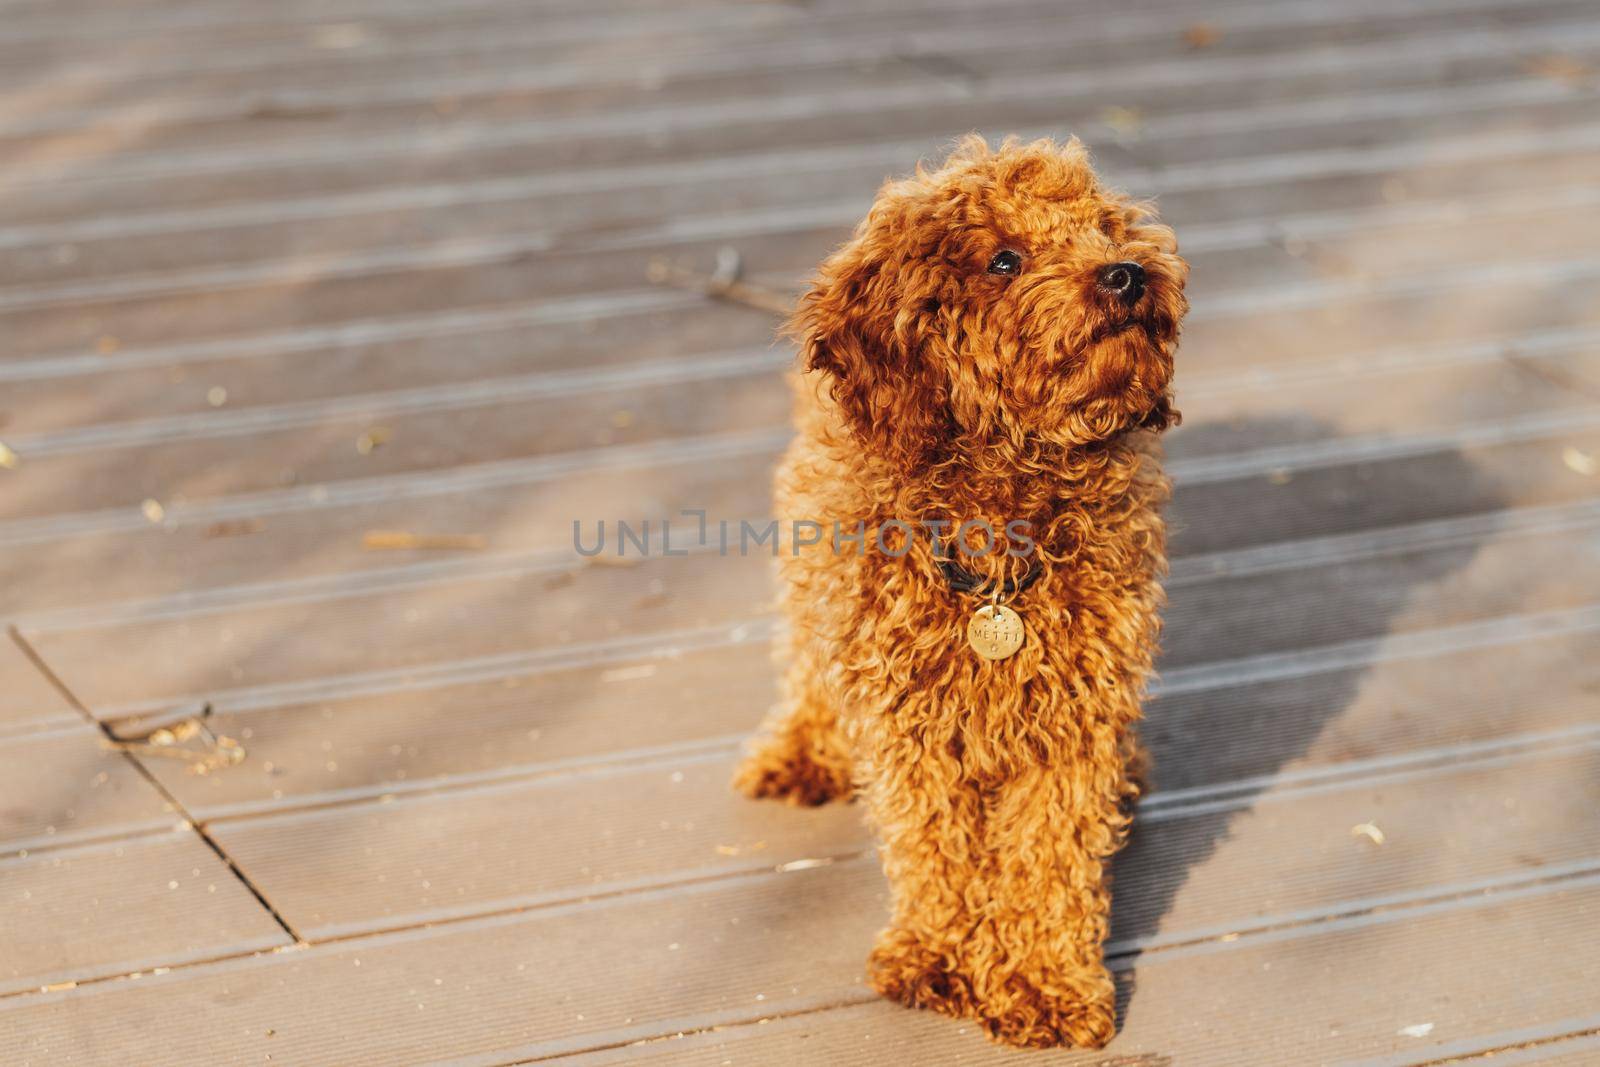 Toy Poodle Breed Called Metti Walking Outdoors, Portrait of a Small Redhead Dog, Copy Space by Romvy